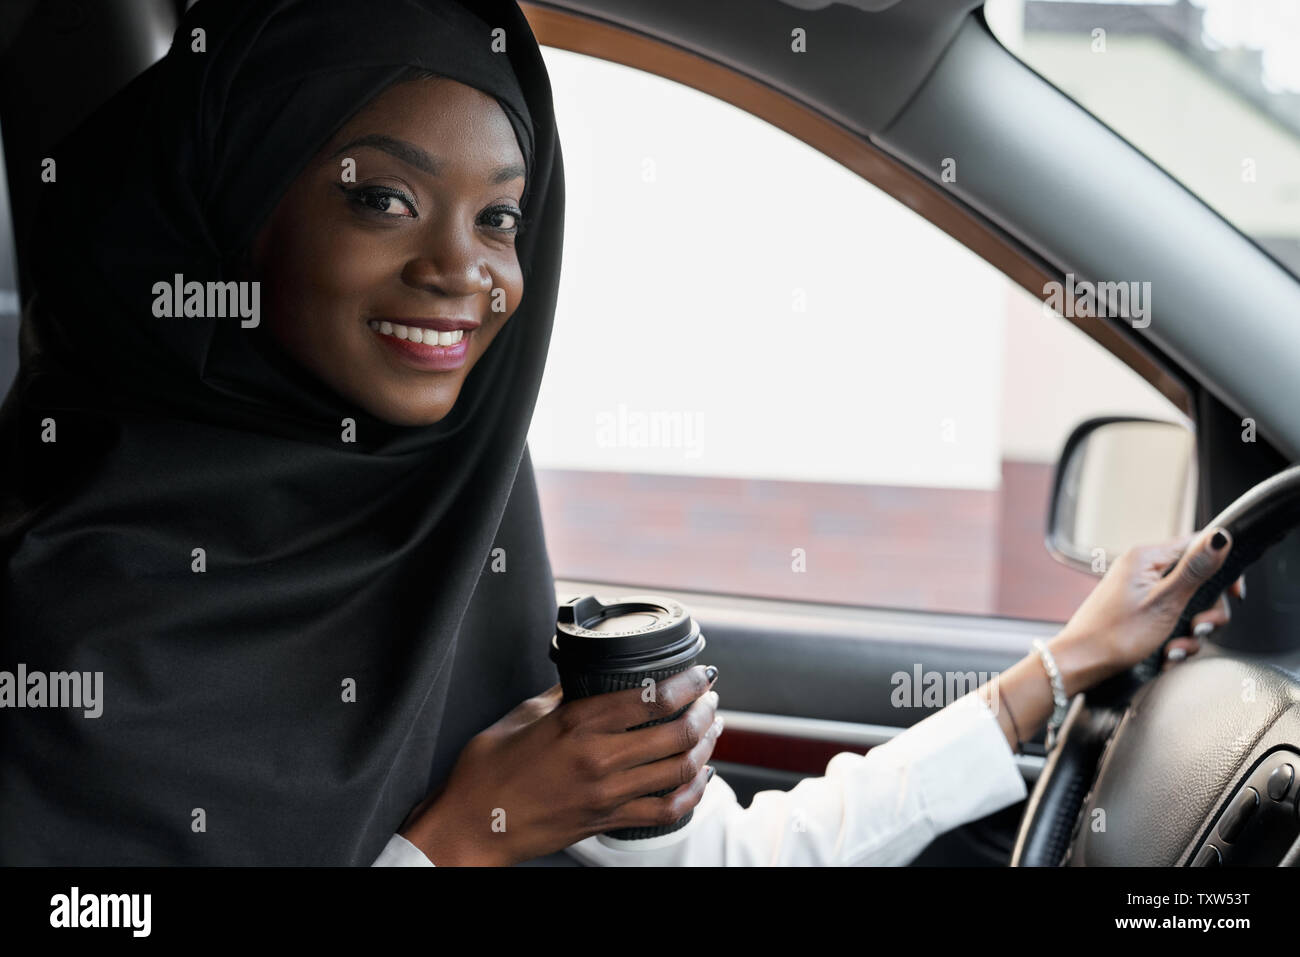 Positive, cheerful african girl sitting in car posing, holding hand on steering wheel. Beautiful muslim woman wearing in black hijab with perfect smile looking at camera, holding coffee cup. Stock Photo